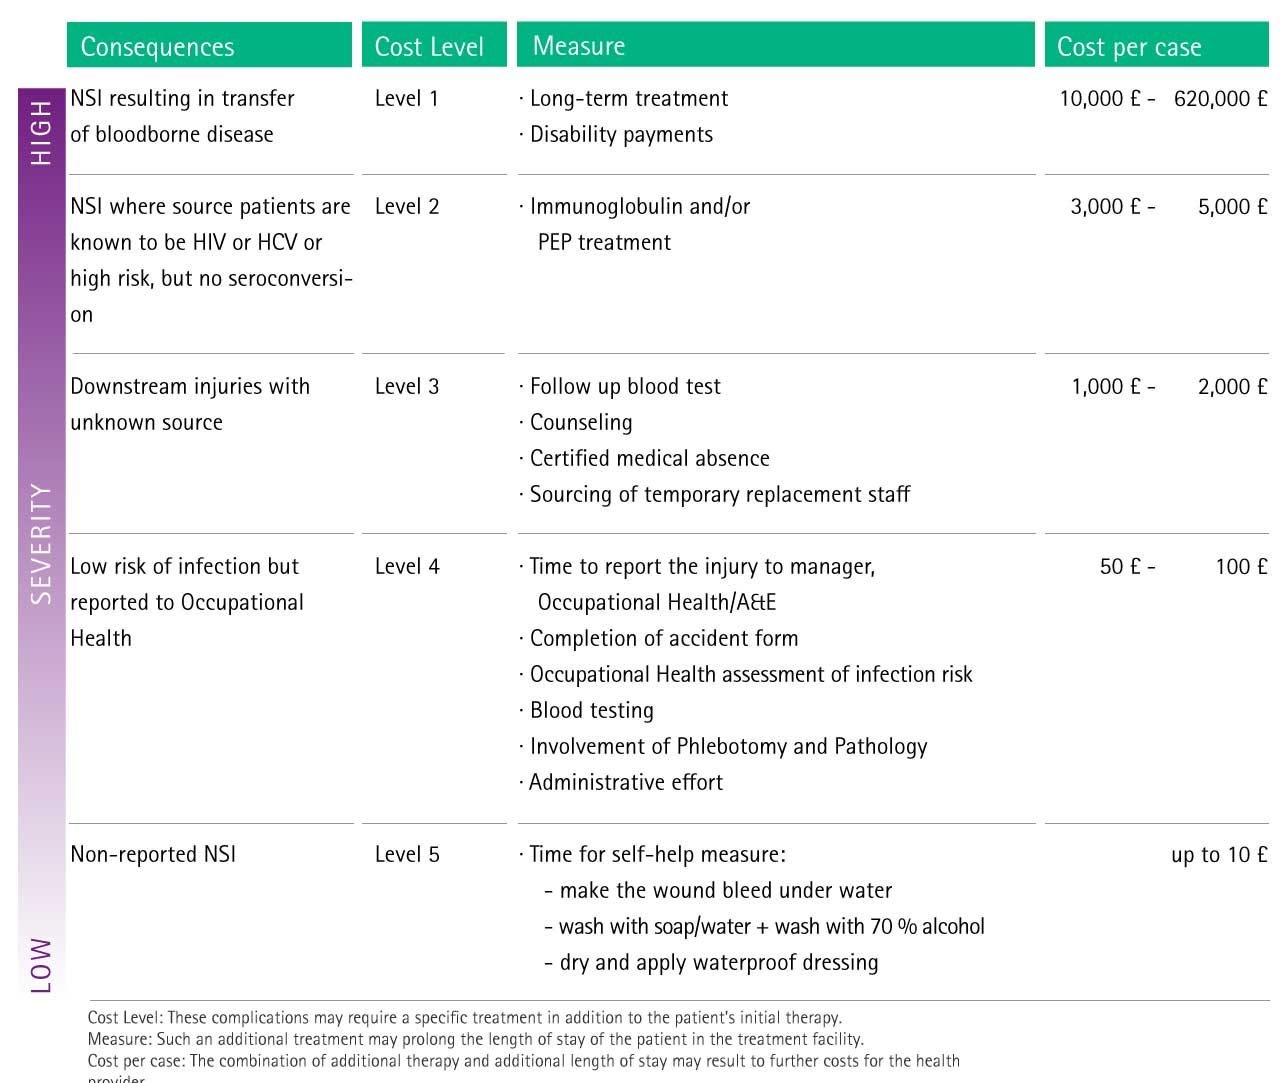 Table with estimations of possible additional costs as a consequence of complications caused by sharps injury.